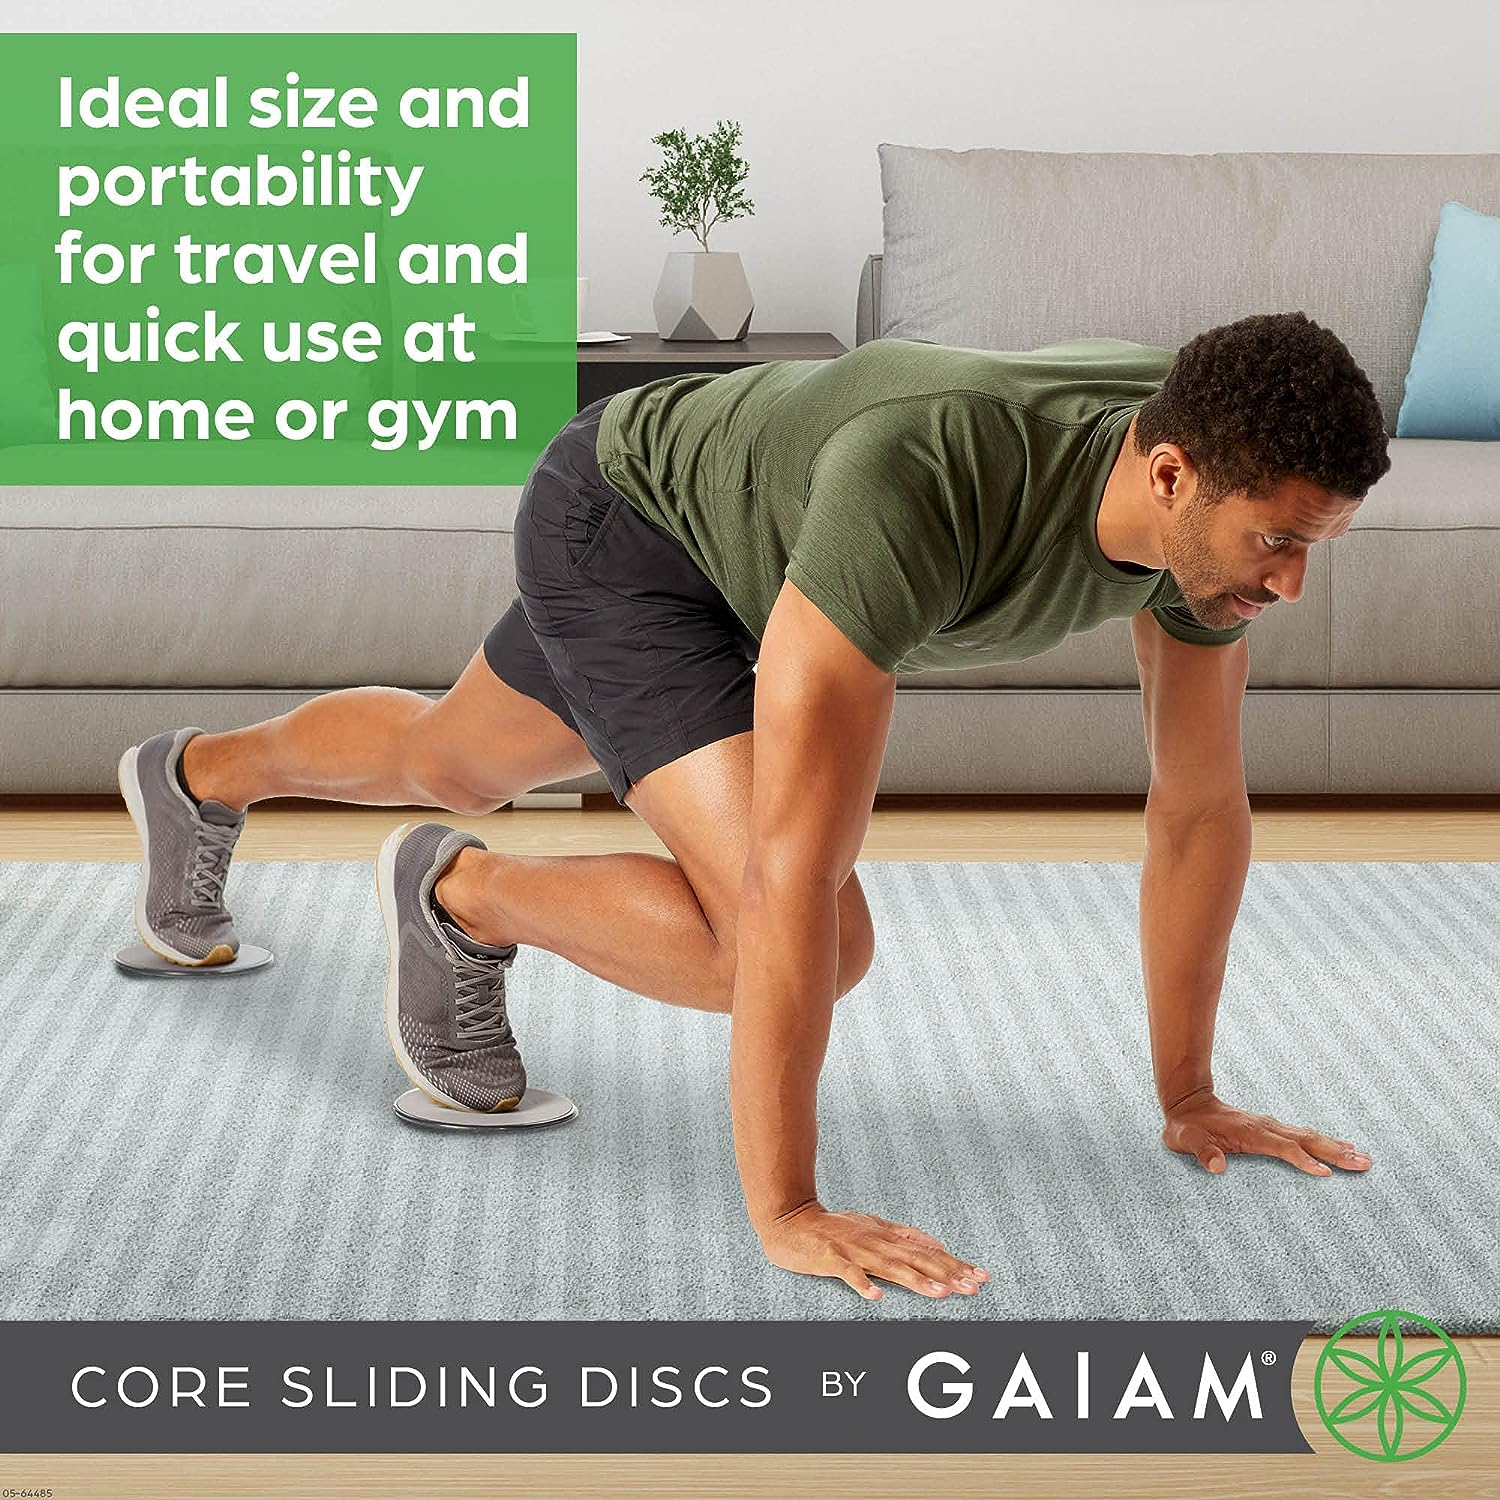 Gaiam Core Sliding Discs - Dual Sided Workout Sliders for Carpet  Hardwood Floor - Home Ab Pads Exercise Equipment Fitness Sliders for Women and Men, Grey/Black